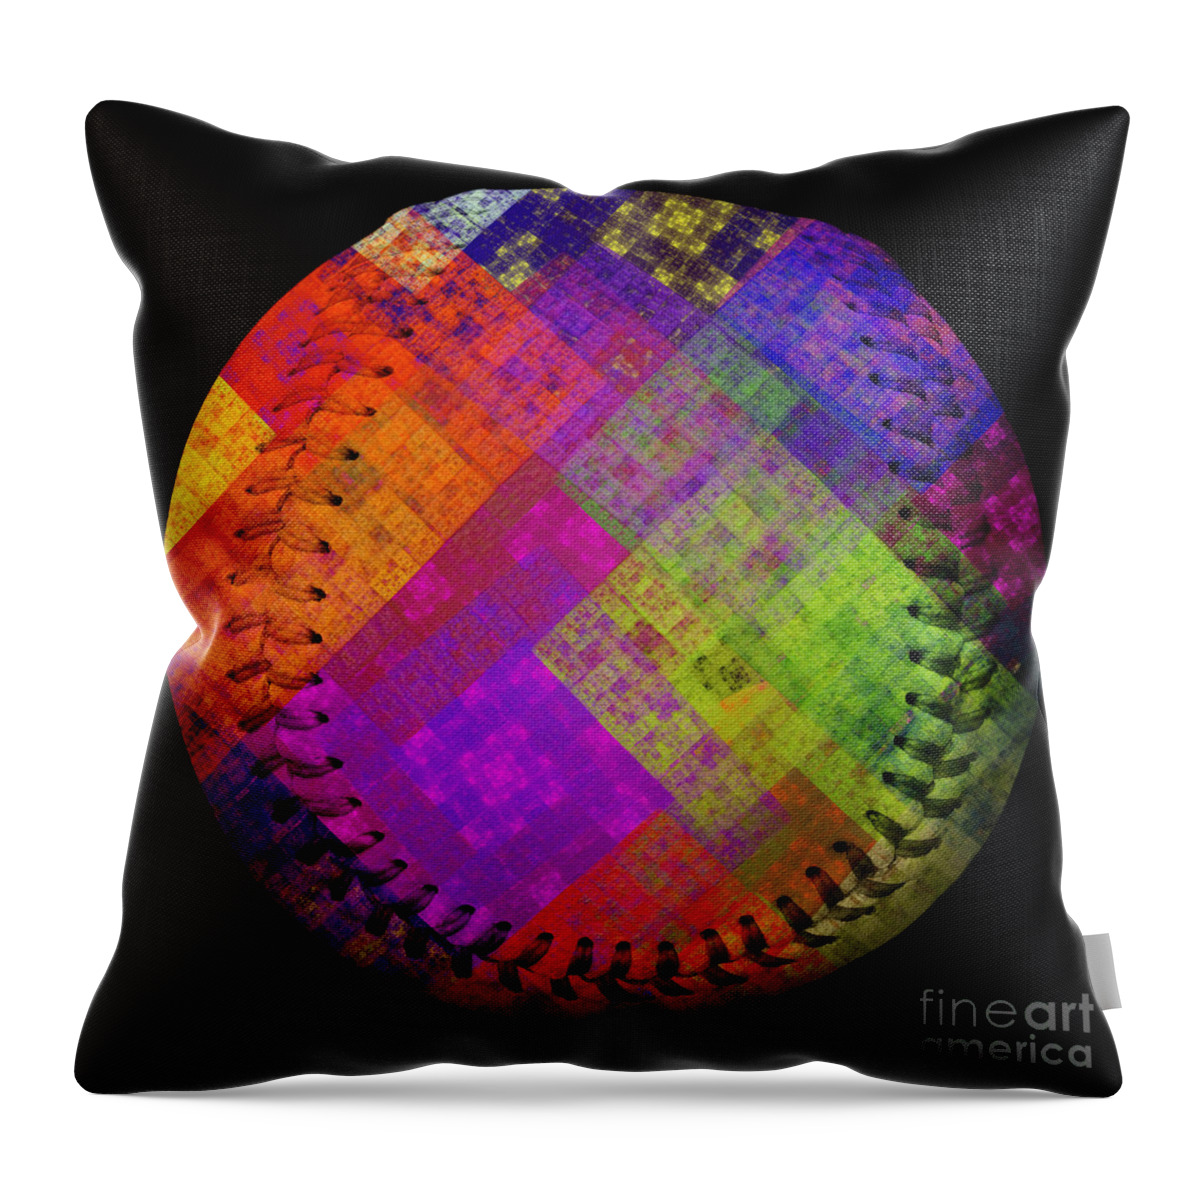 Baseball Throw Pillow featuring the digital art Rainbow Infusion Baseball Square by Andee Design